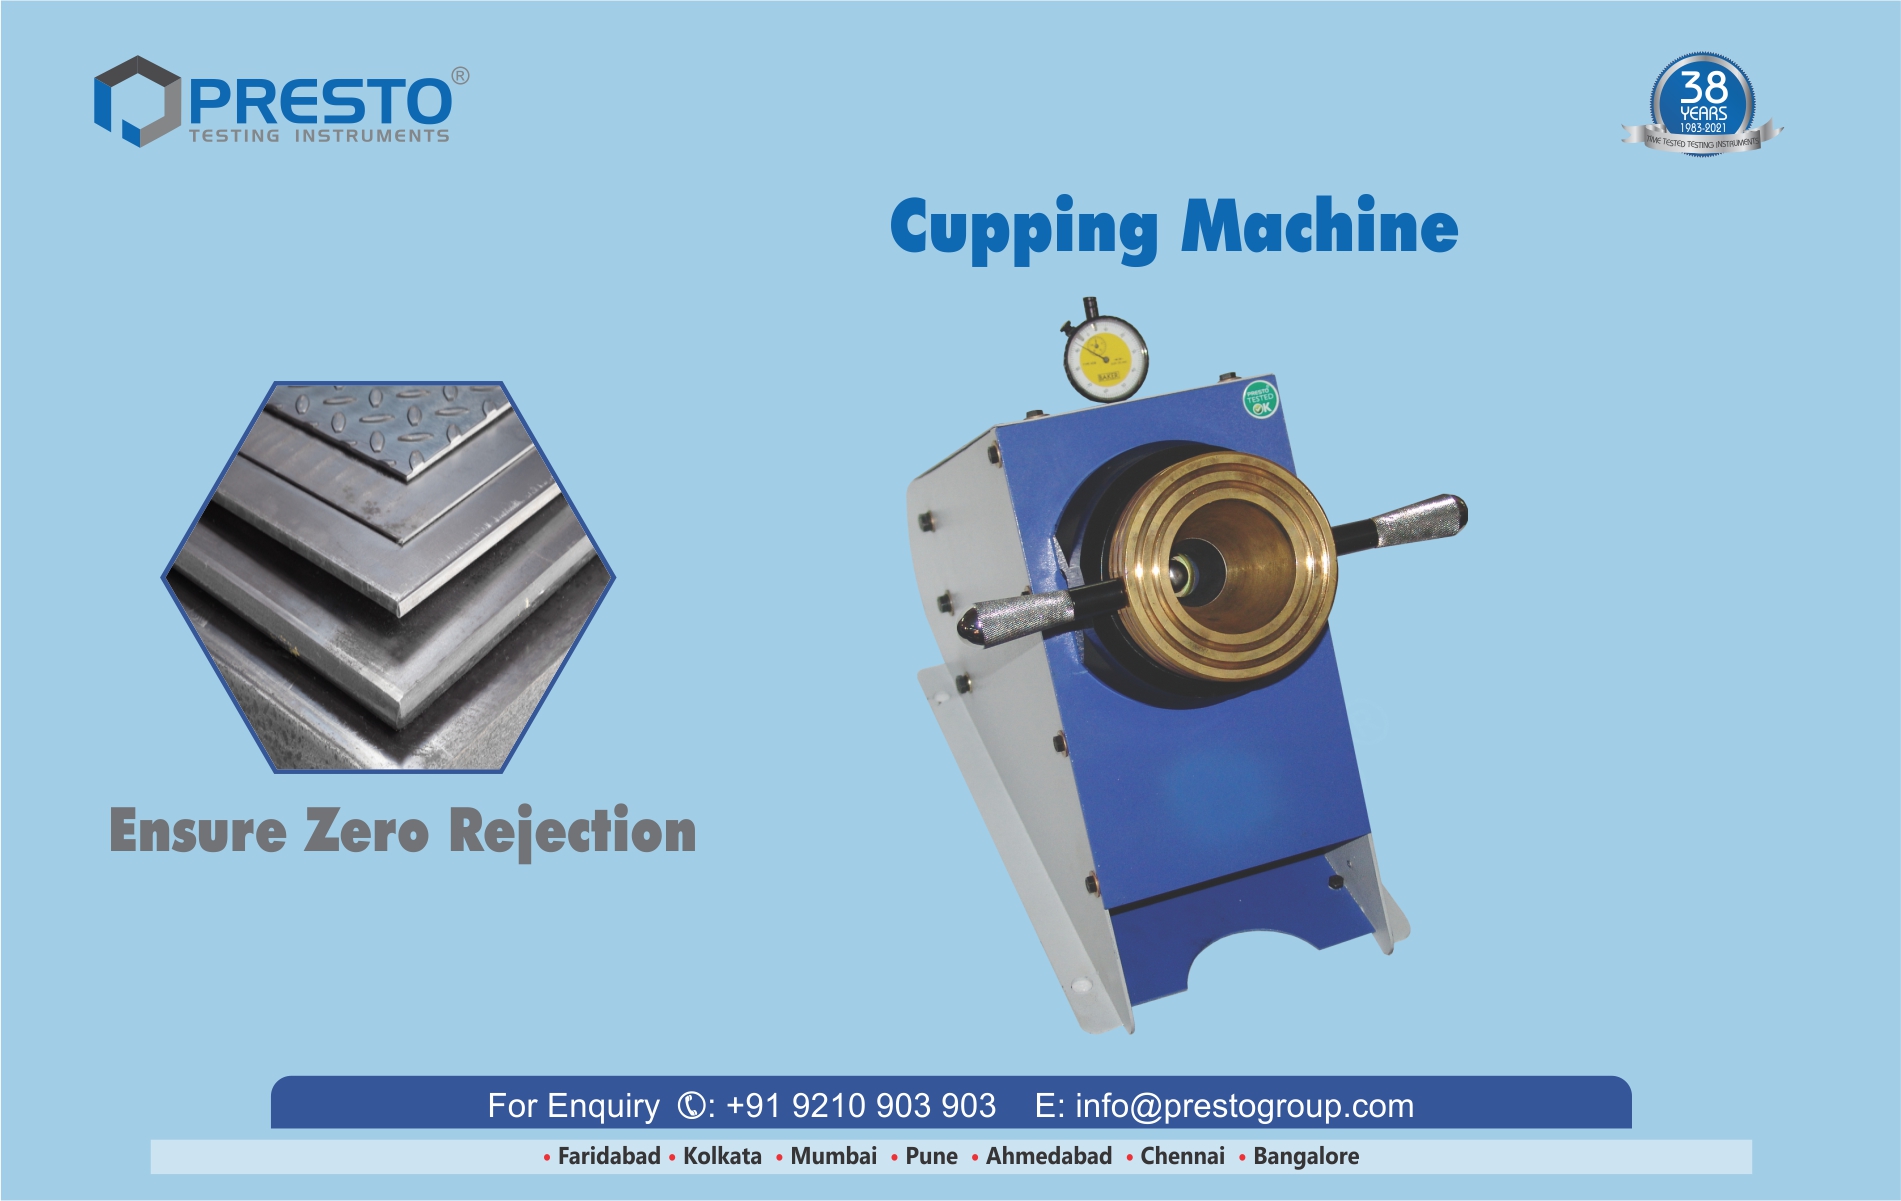 Cupping Machine to Test Draw Ability of Metal Components